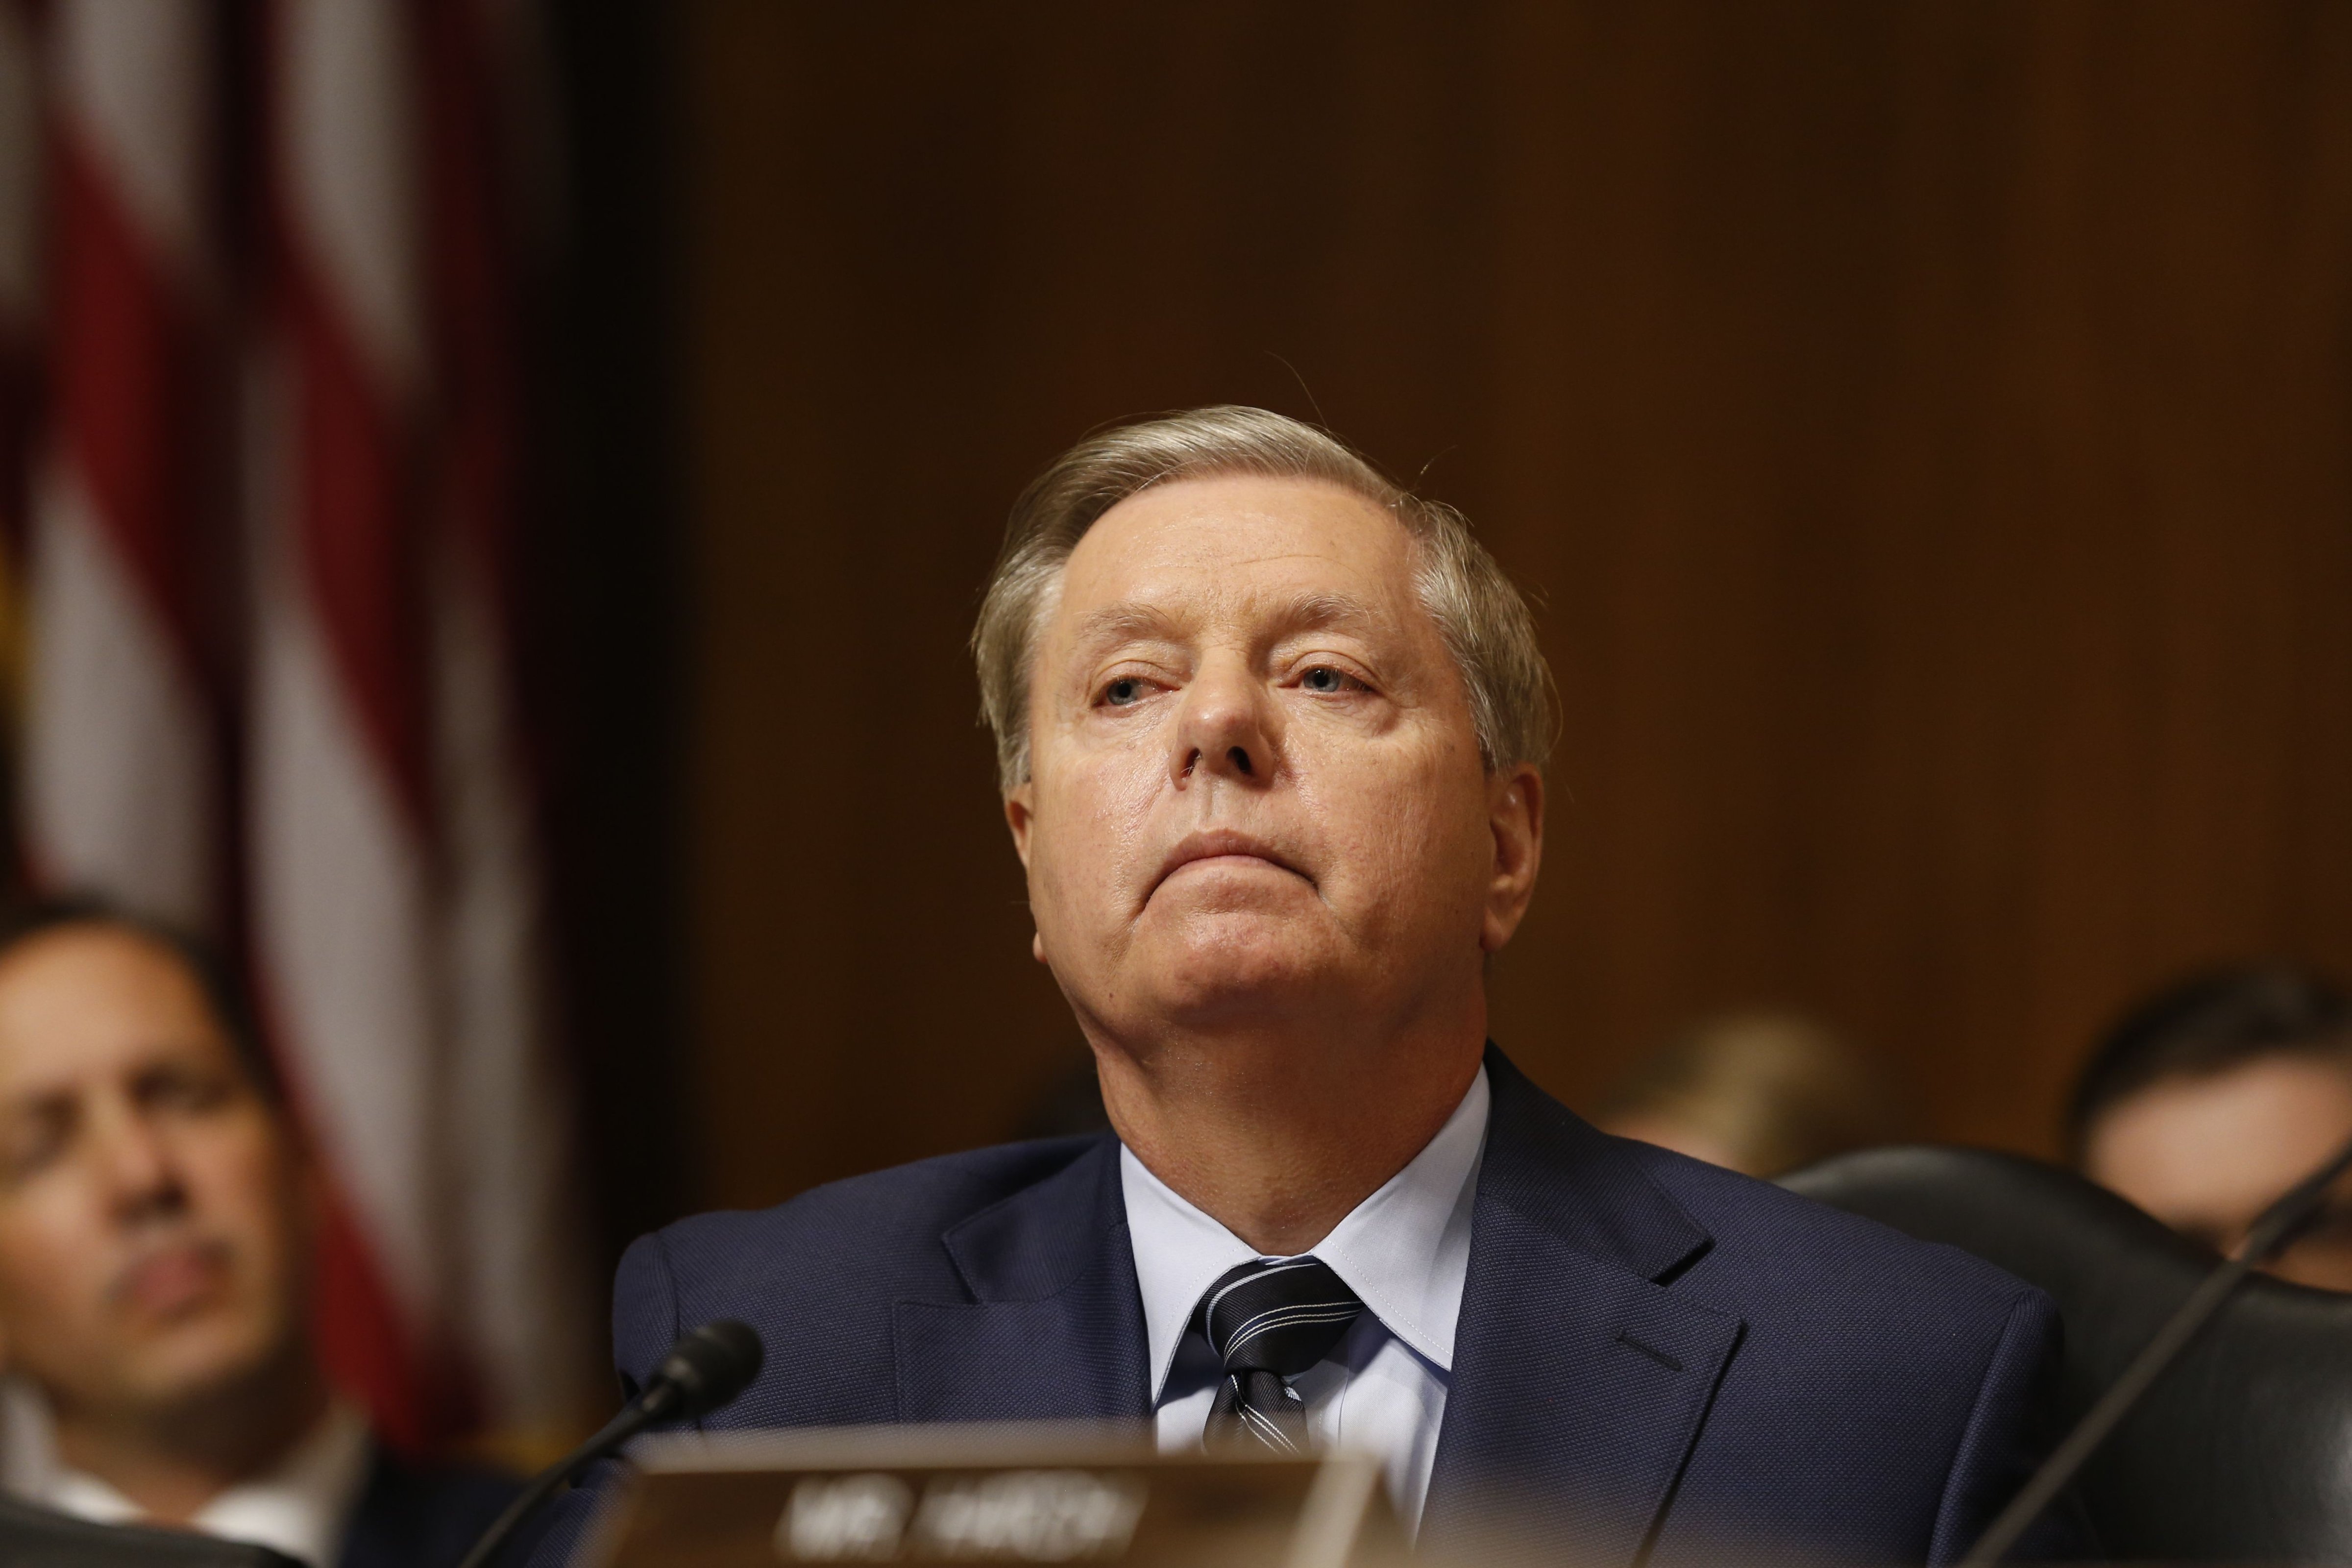 Senator Lindsey Graham (R-SC) listens to Dr. Christine Blasey Ford speak before the Senate Judiciary Committee hearing on the nomination of Brett Kavanaugh to be an associate justice of the Supreme Court of the United States, on Capitol Hill on Sept. 27. (Pool via CNP/REX/Shutterstock—Pool via CNP/REX/Shutterstock)